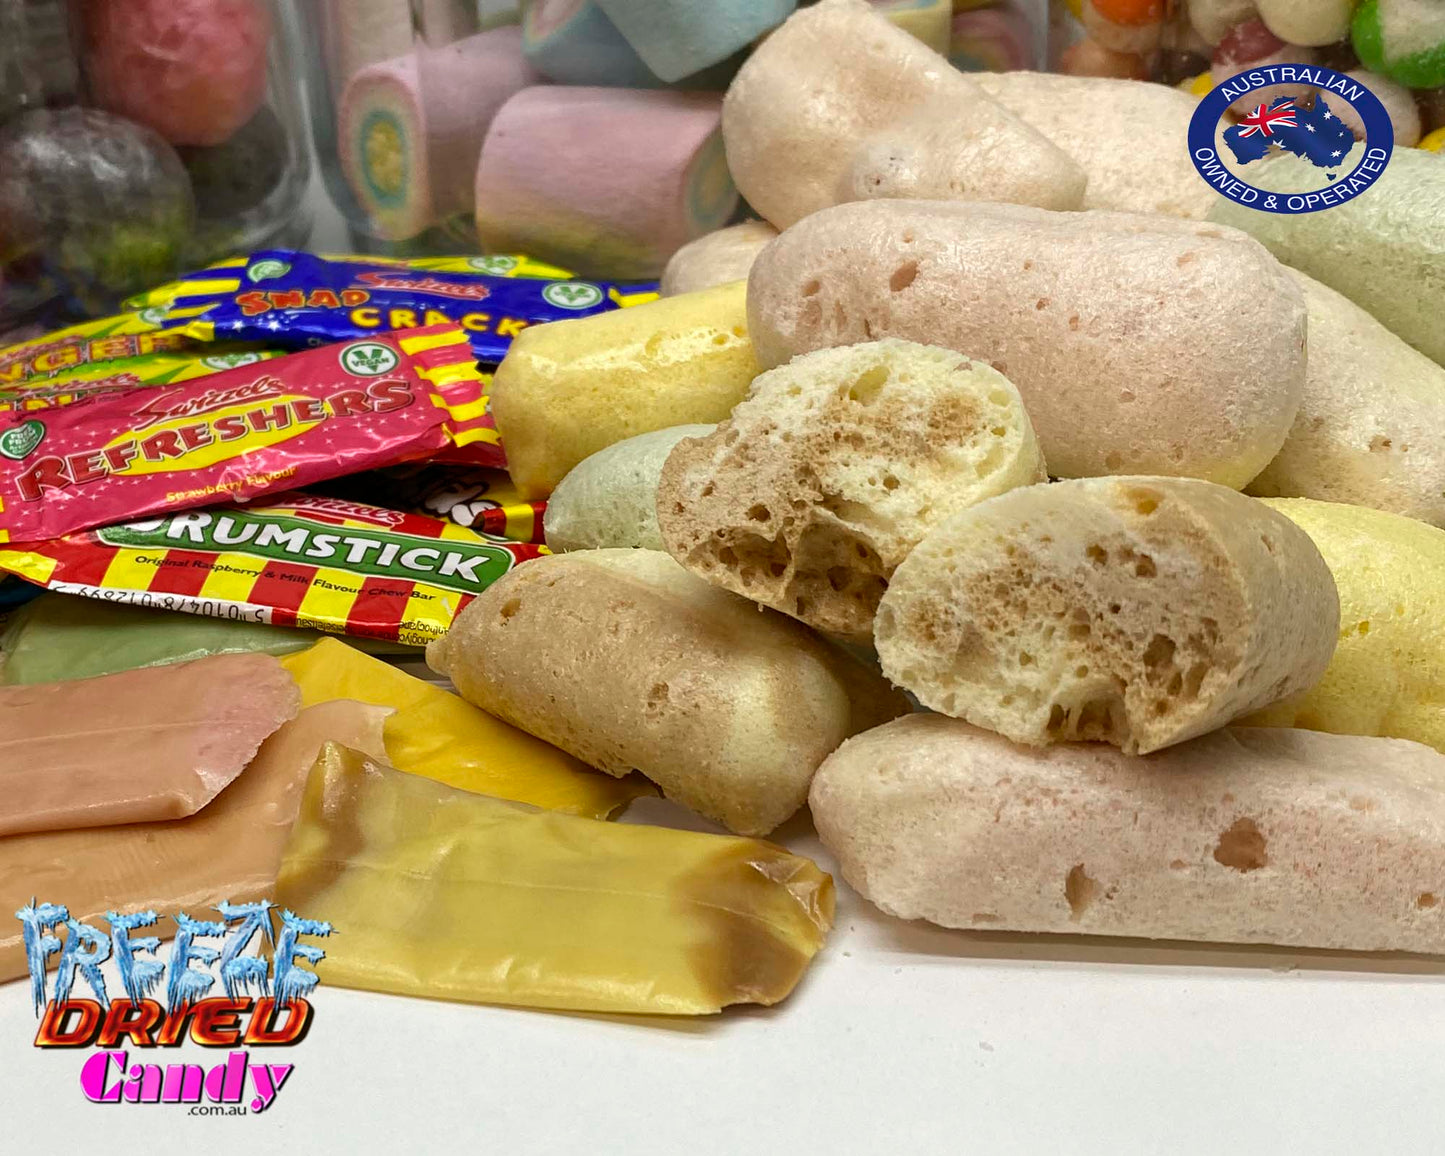 Freeze Dried Swizzels - Mini Me Chew Bars - Freeze Dried Candy Lollies  We have taken the classic Swizzels Mini Me Chew bar and put it through the freeze drying process, they keep their wonderful flavors but ditch the chewy texture. They are now little bursts of crunchy freeze dried goodness in your favorite Swizzel Chew bar. 